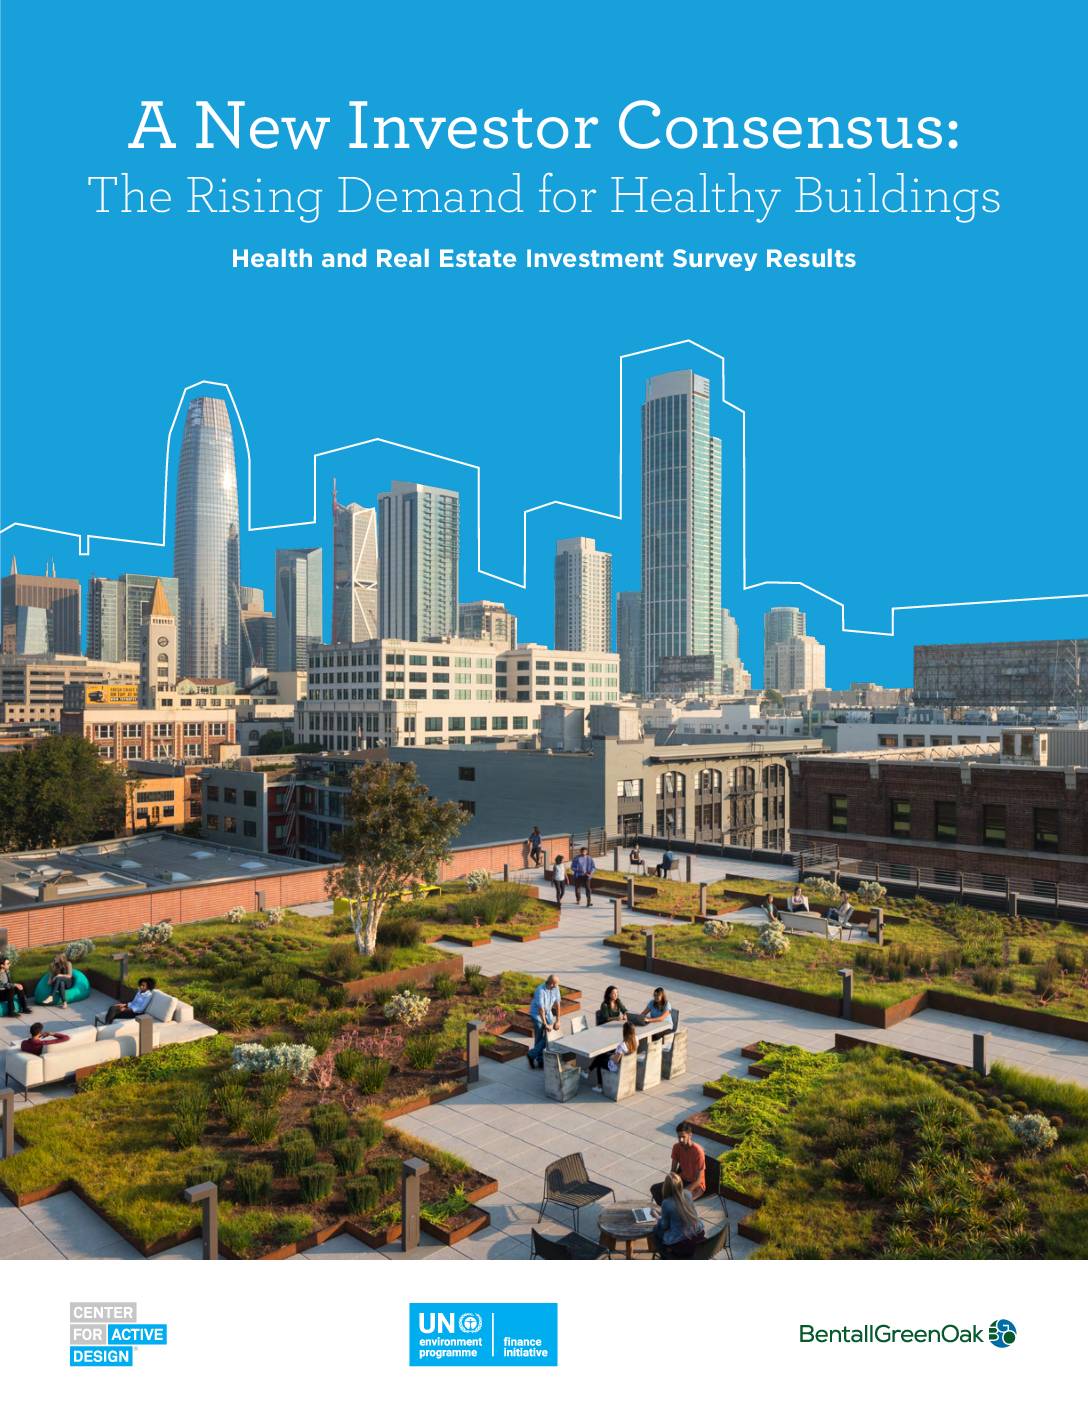 A New Investor Consensus: The Rising Demand for Healthy Buildings